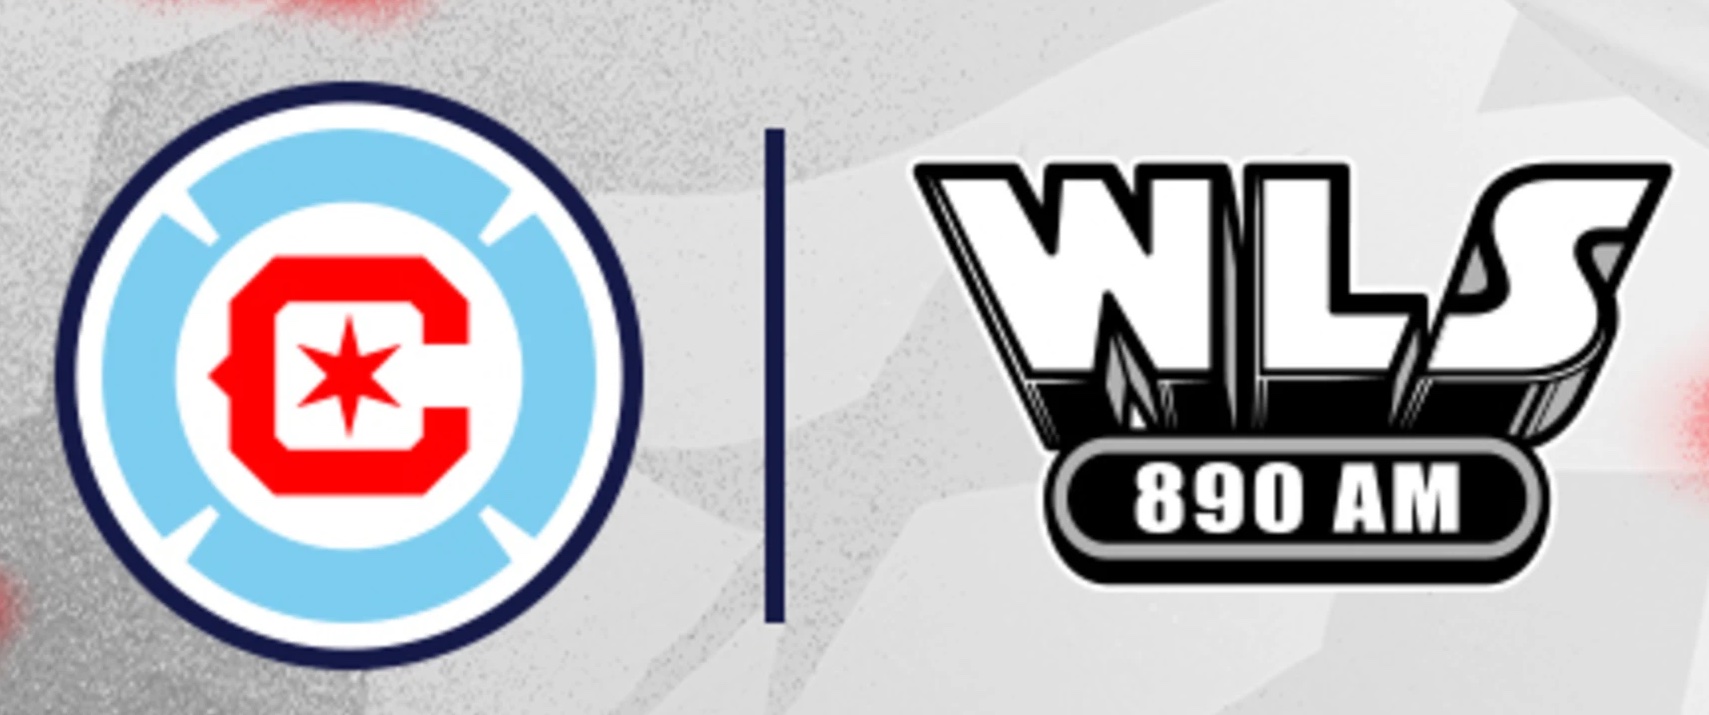  Chicago Fire Soccer To Be Heard On WLS-A/Chicago